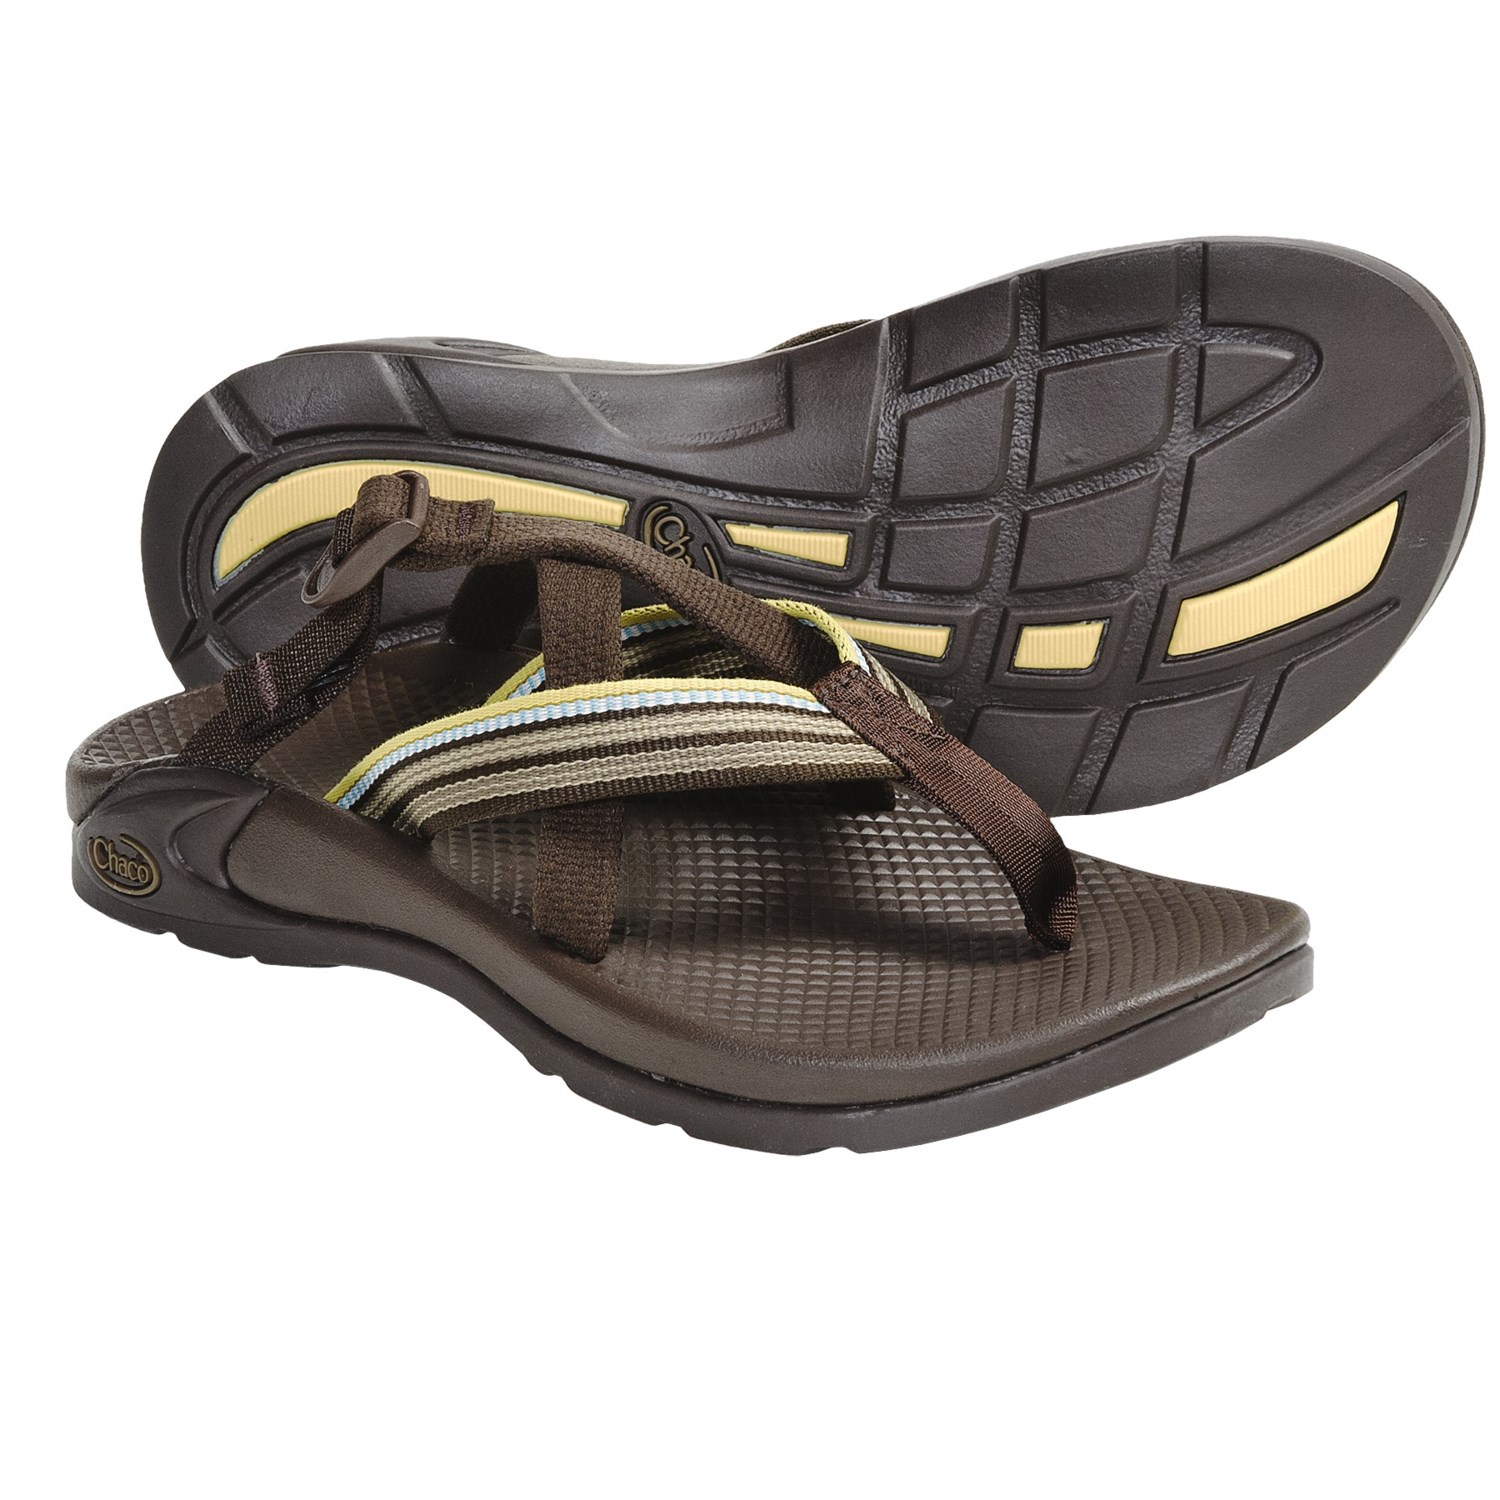 Chaco Hipthong Two EcoTread Sport Sandals (For Women) - Save 20%